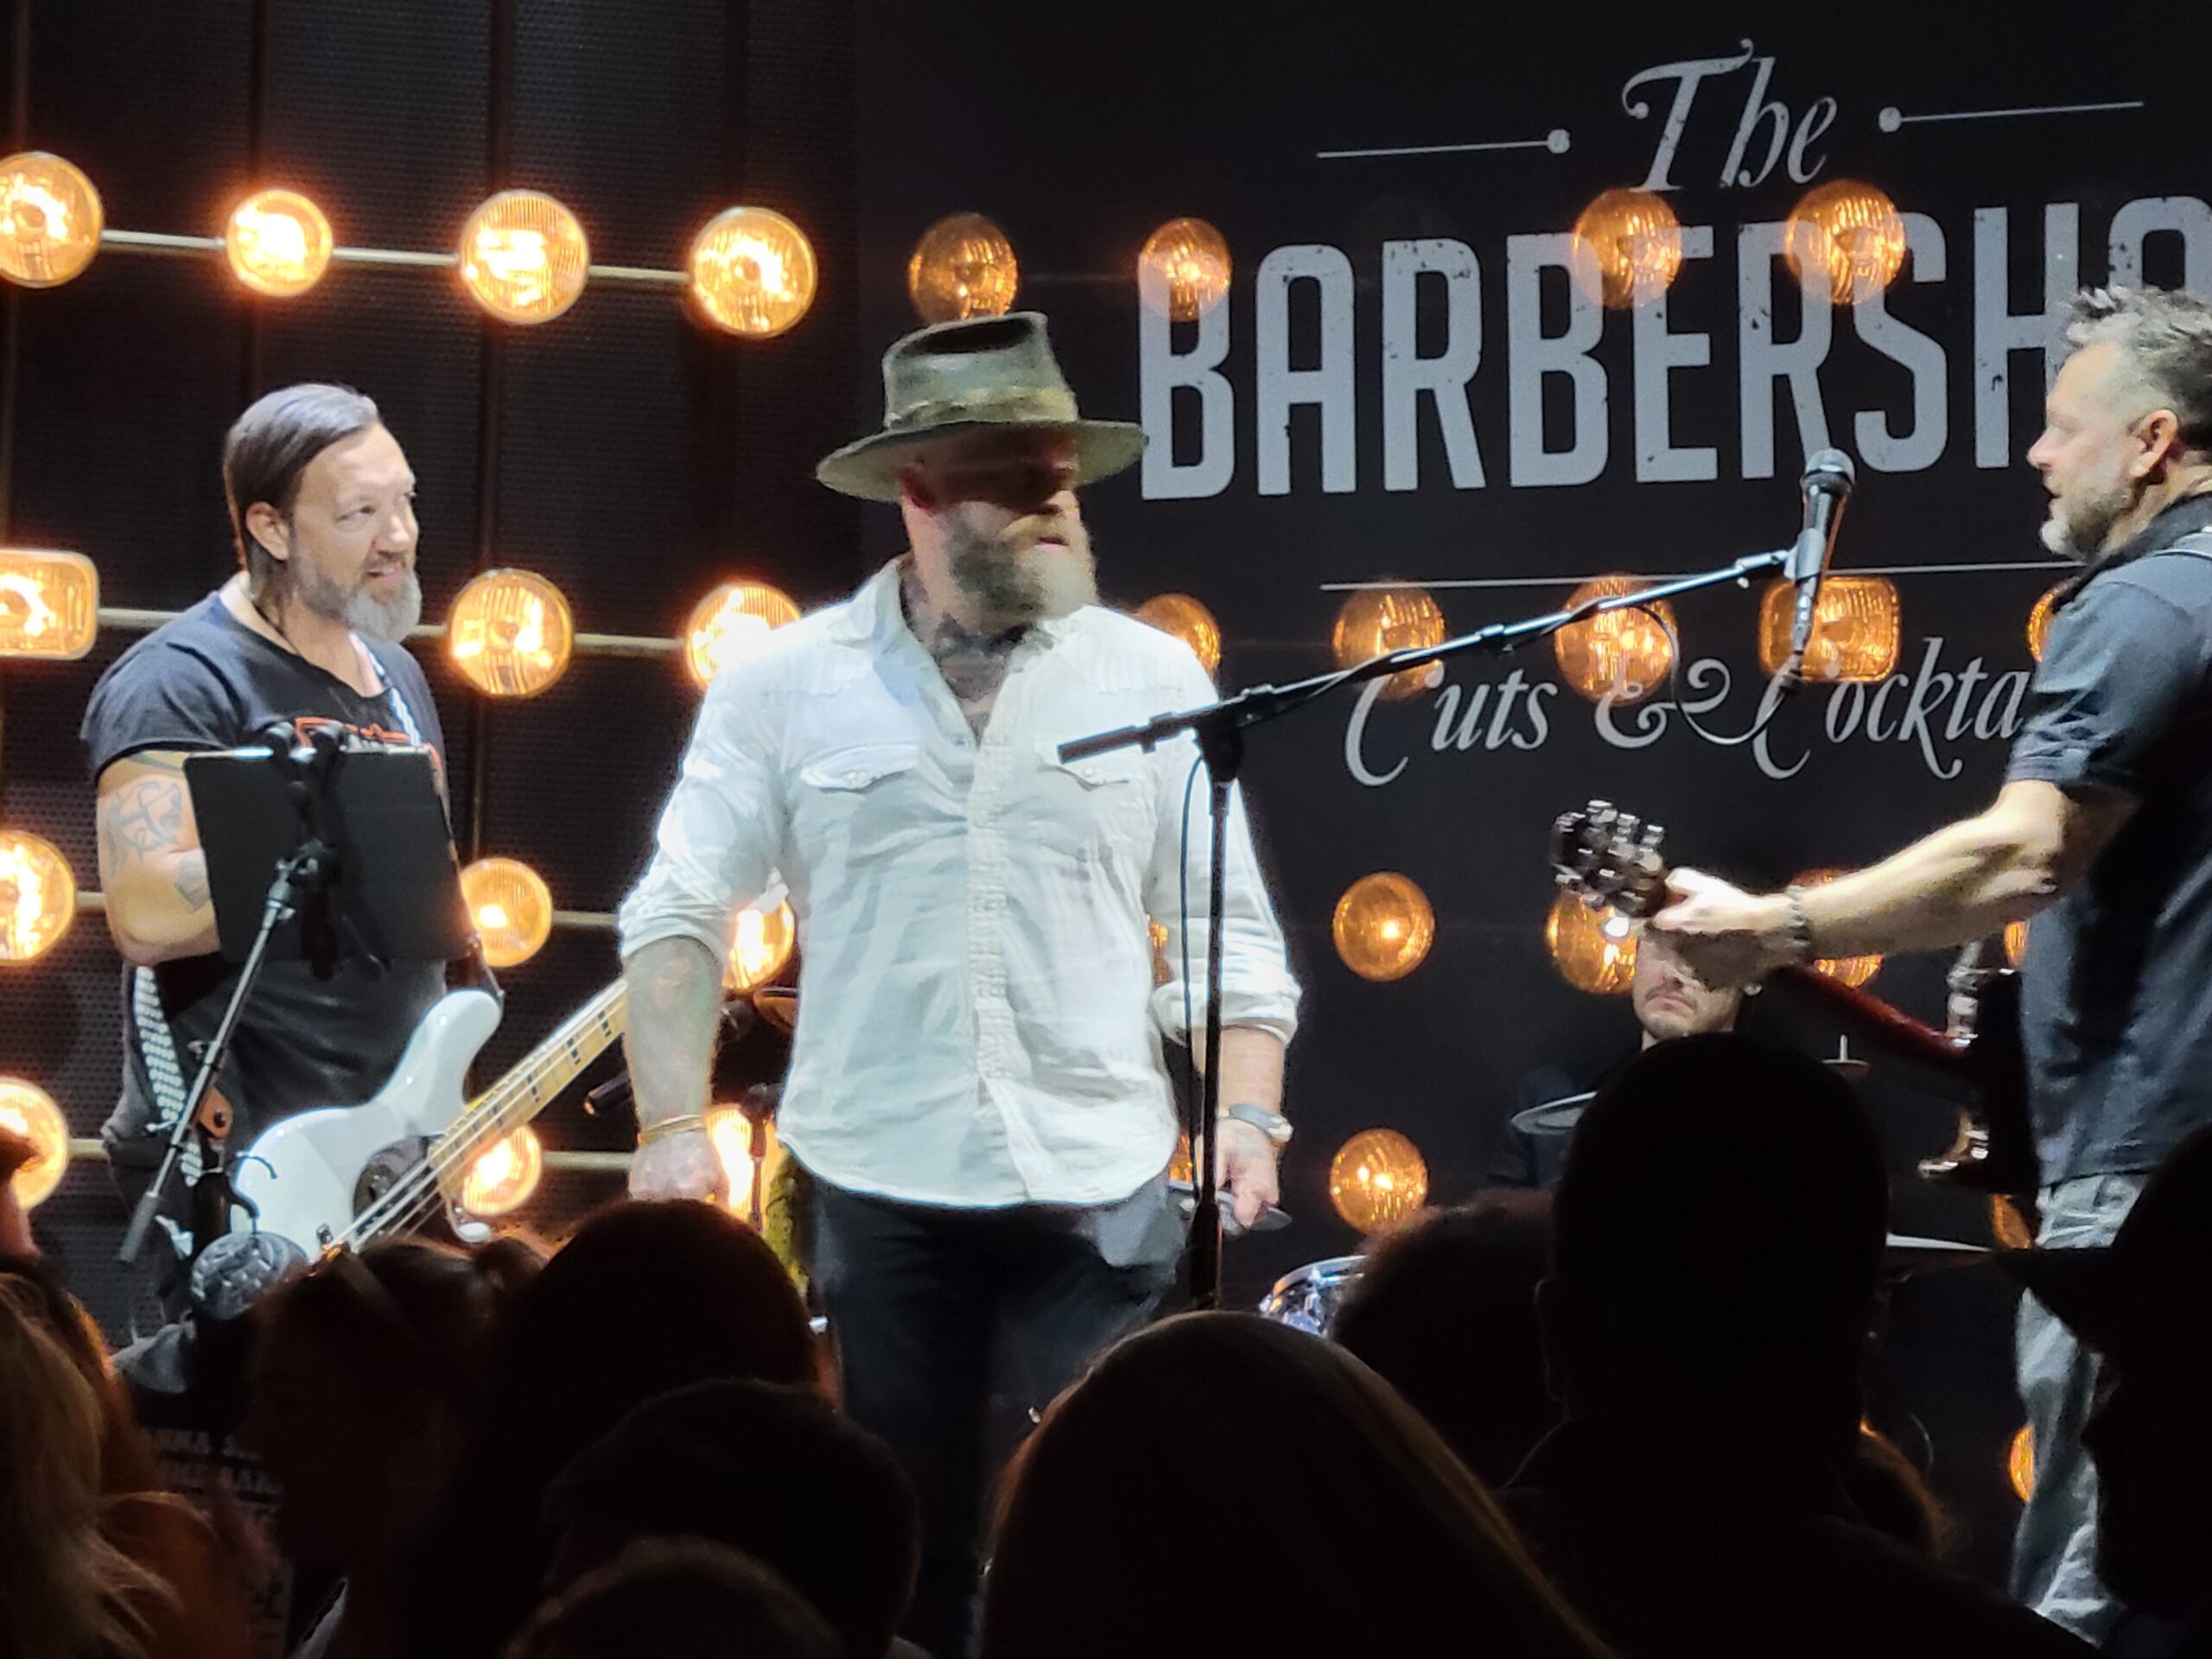 Zac Brown Surprise Performance at The Barbershop_courtesy of The Barbershop Cuts & Cocktails